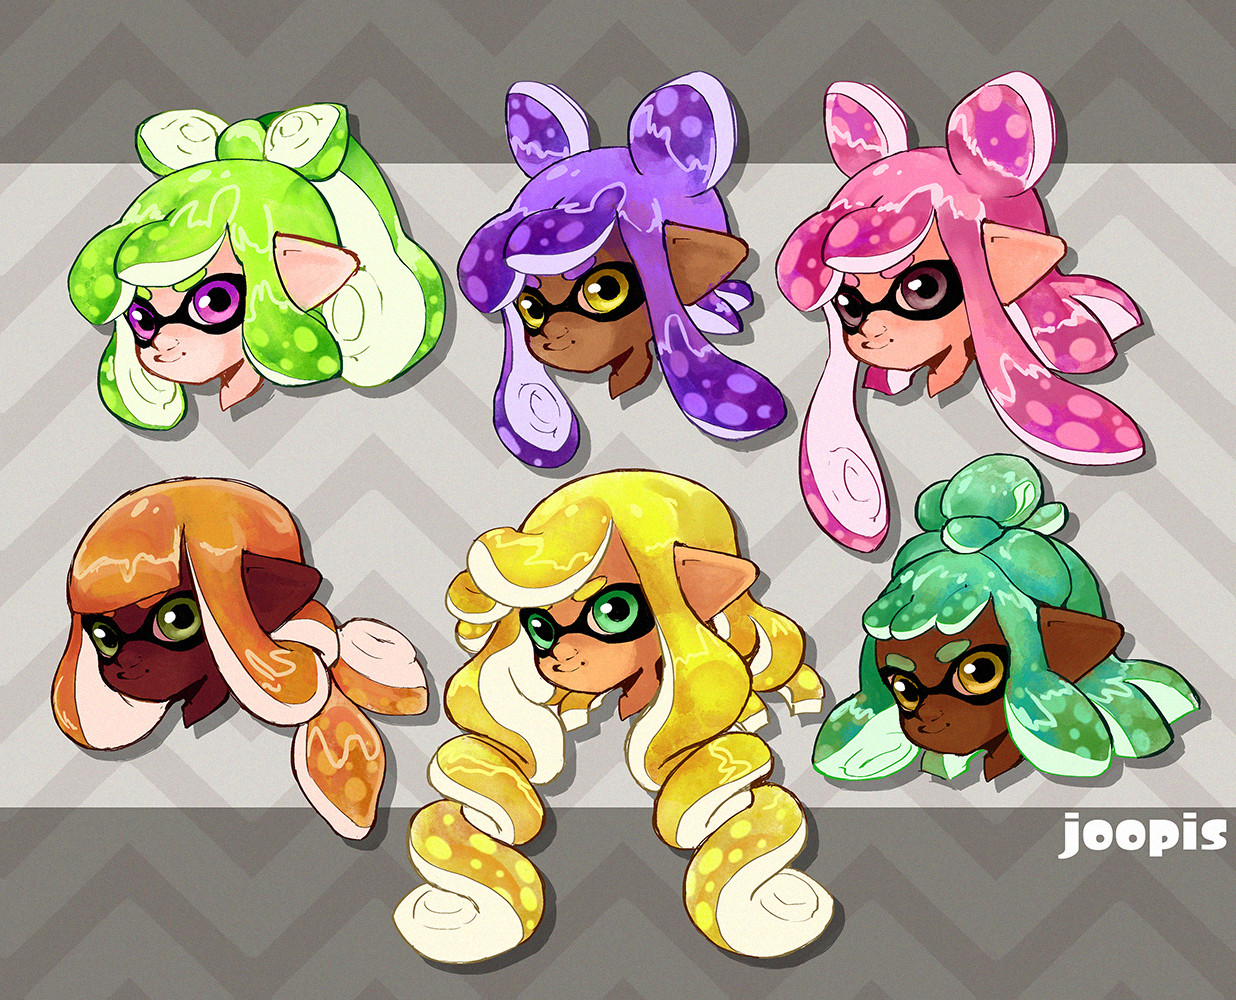 Inkling Girl Hairstyles
 I doodled some Inkling hairstyles splatoon